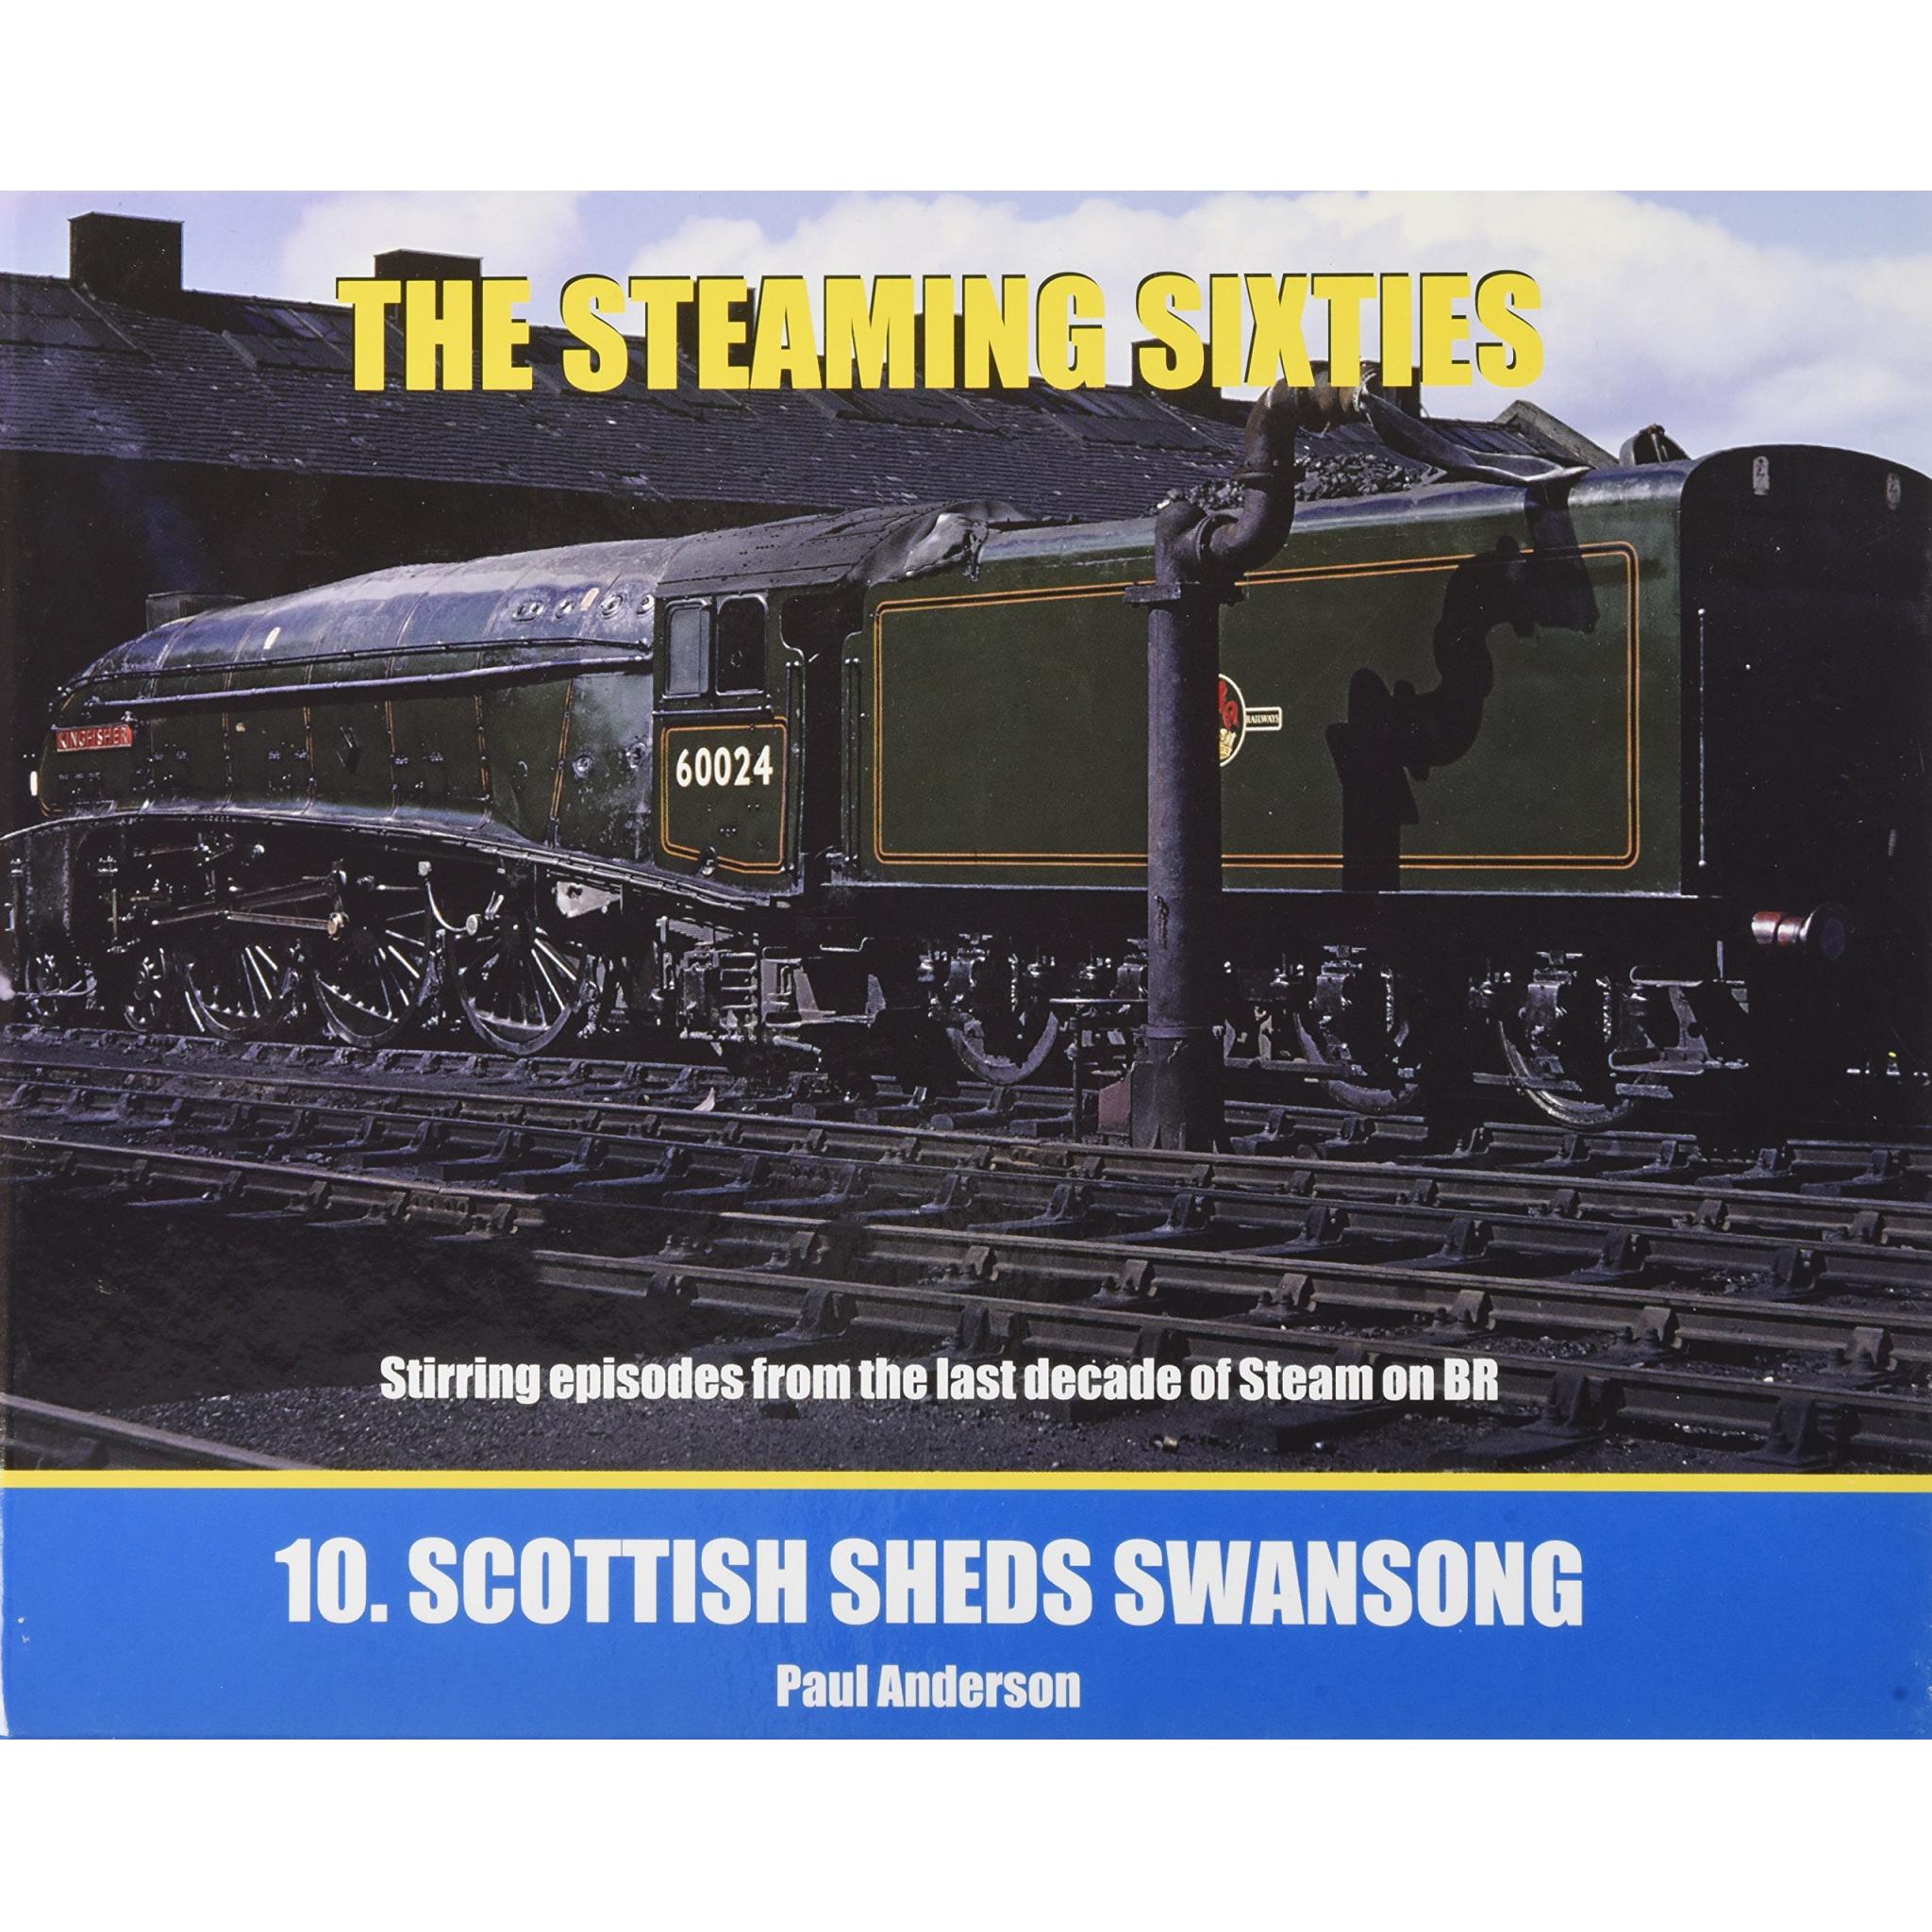 THE STEAMING SIXTIES No.10 Scottish Sheds Swansong